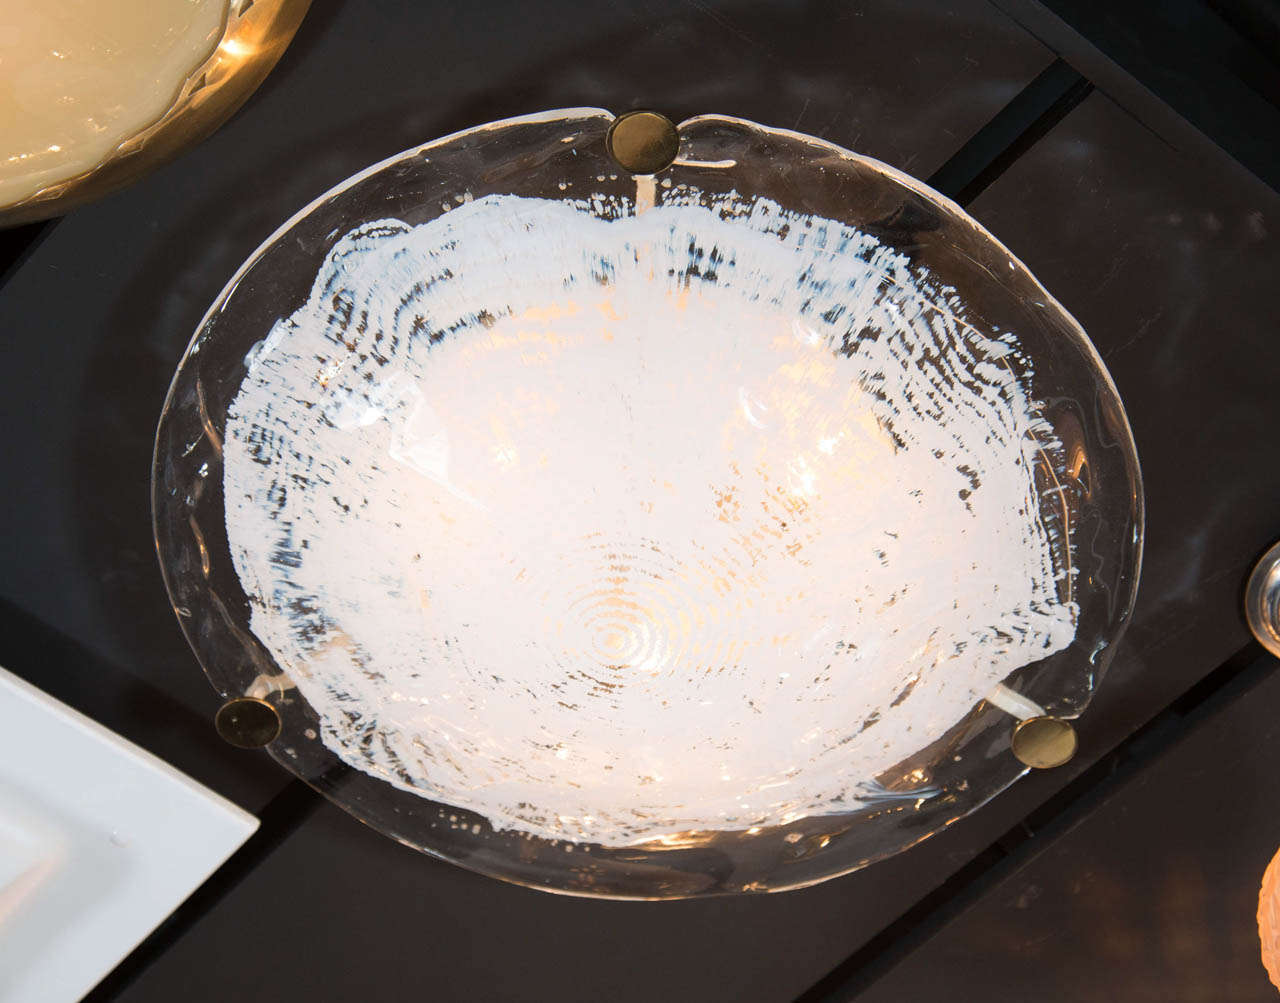 A Mid-Century Modernist dome shaped flush mount by Mazzega in clear high quality hand blown glass with a white semi-transparent textured central design. The thick glass has an organic quality to it which is secured with brass fittings. It has been